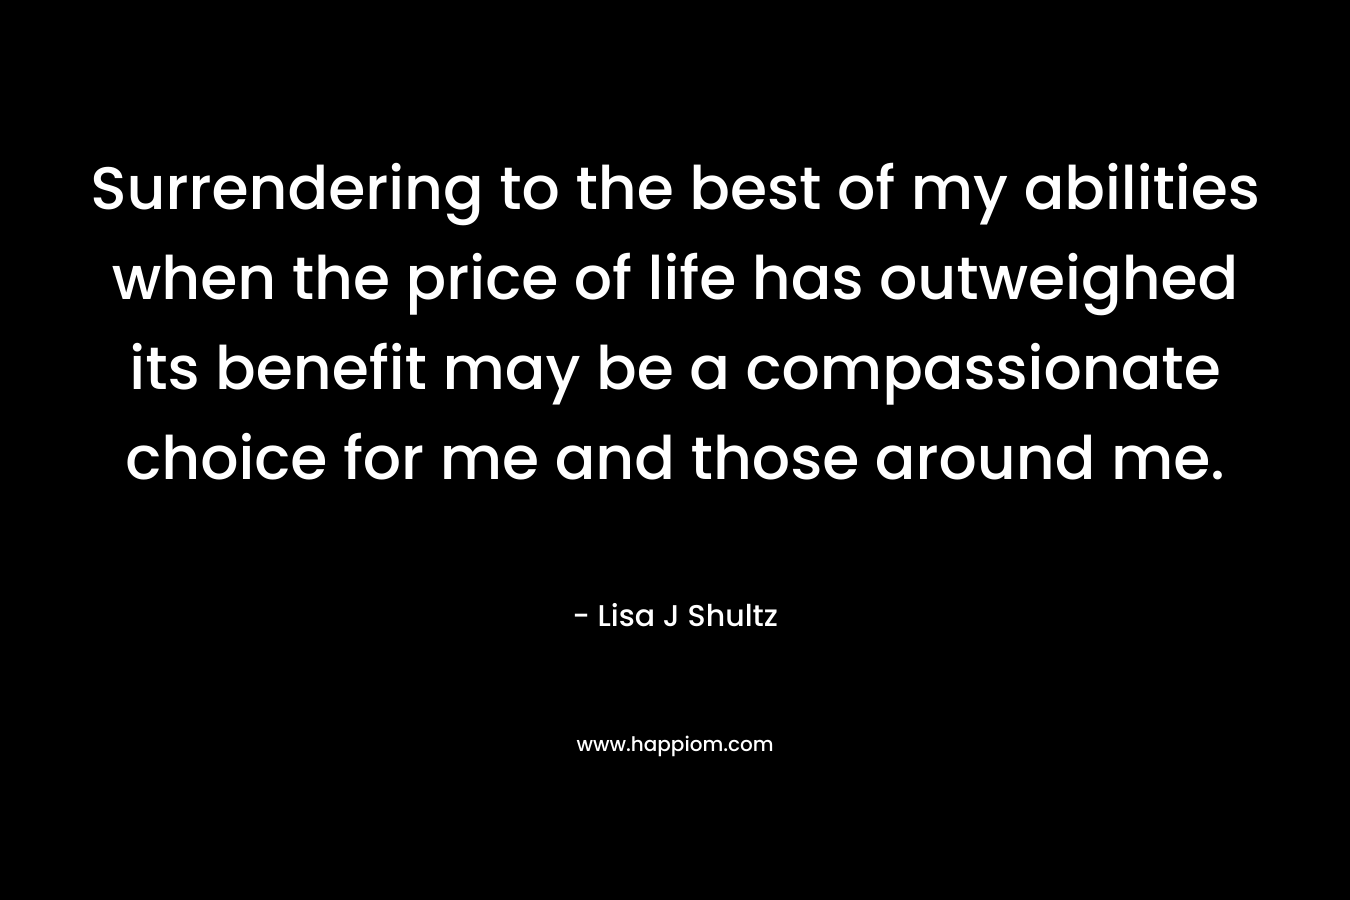 Surrendering to the best of my abilities when the price of life has outweighed its benefit may be a compassionate choice for me and those around me.